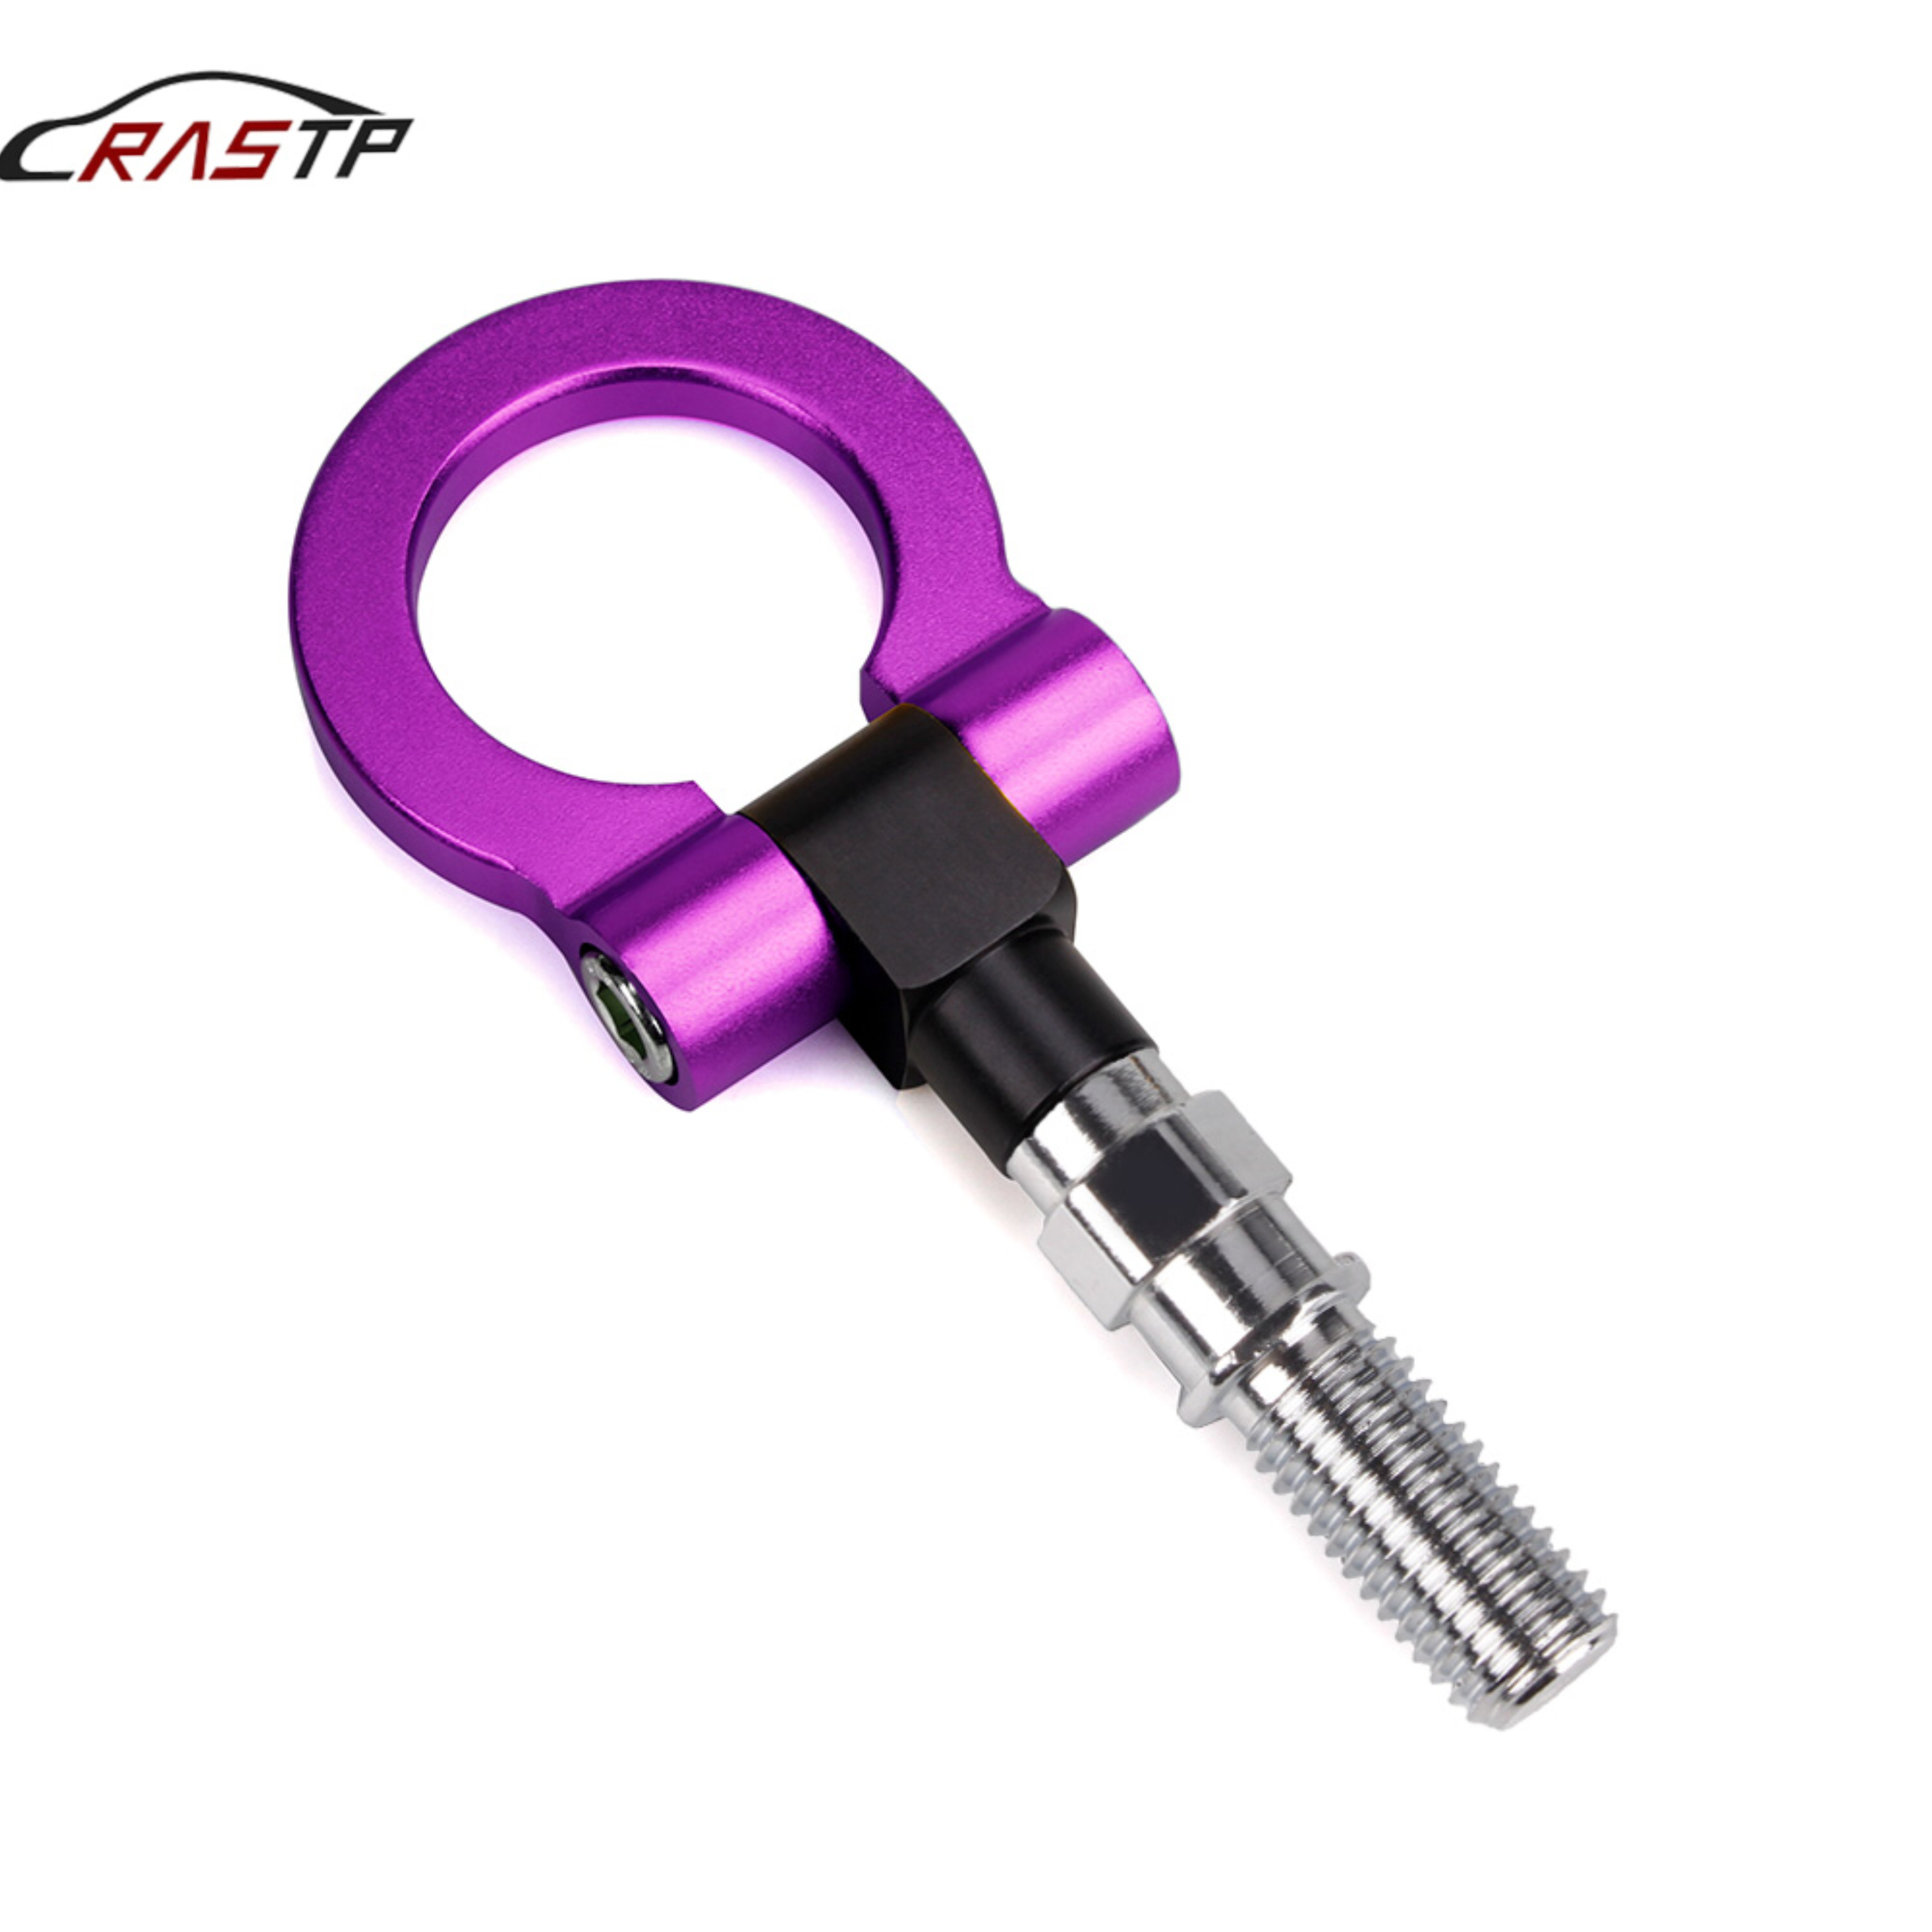 

RASTP-Universal Racing Front Tow Hook Auto Trailer Ring Vehicle Towing Hanger For Japanese Car Accessories Purple RS-TH008-2